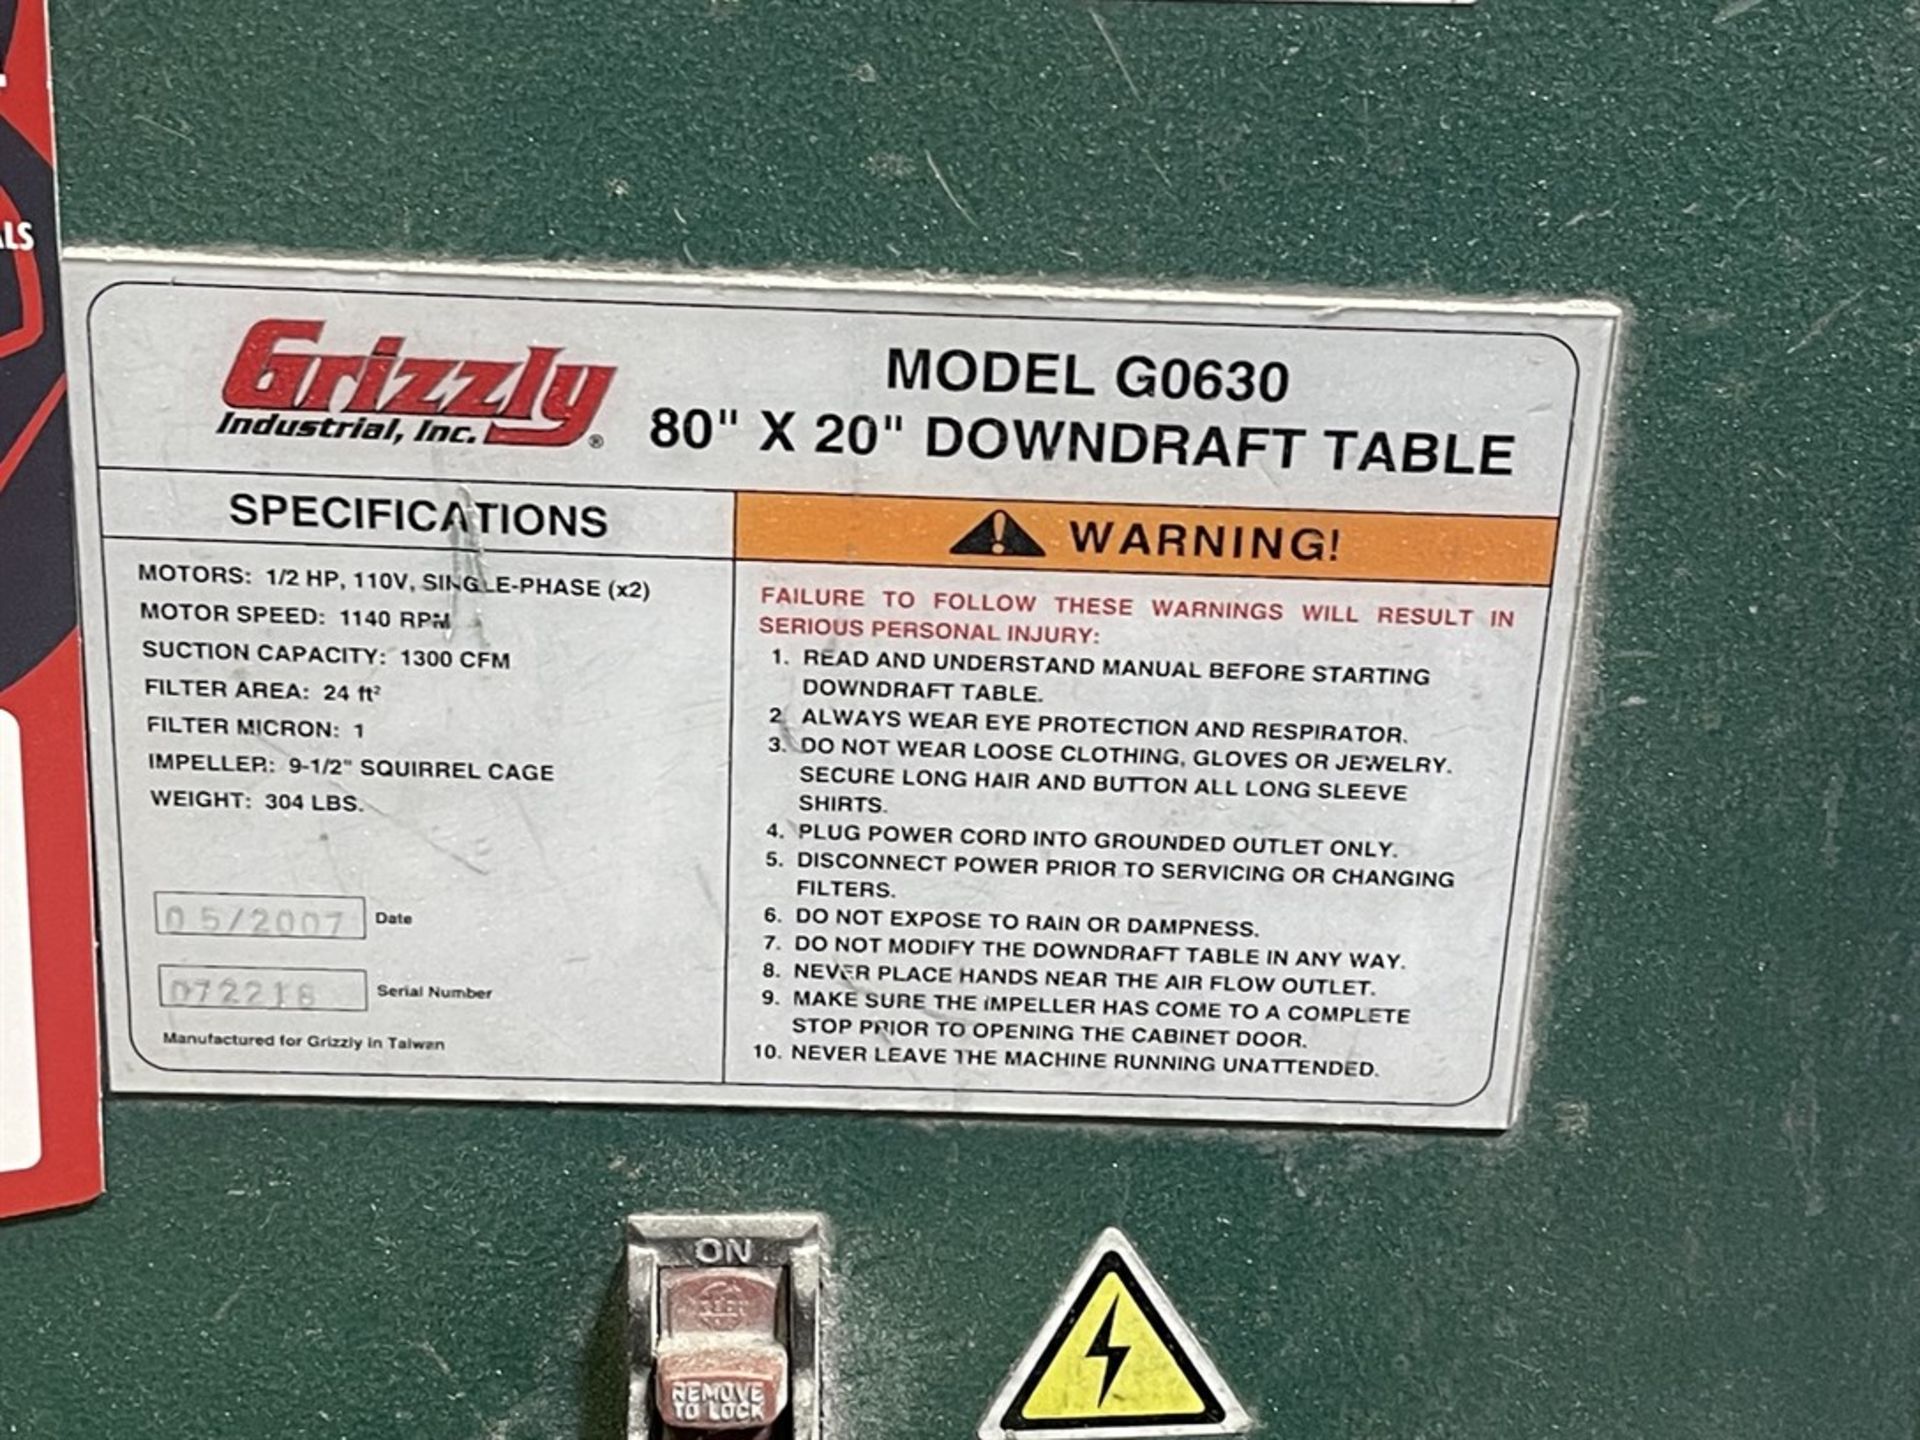 2007 GRIZZLY G0630 Downdraft Table, s/n 072218, 20” x 80” Table, ½ HP, 1140 RPM, 1300 CFM - Image 3 of 3